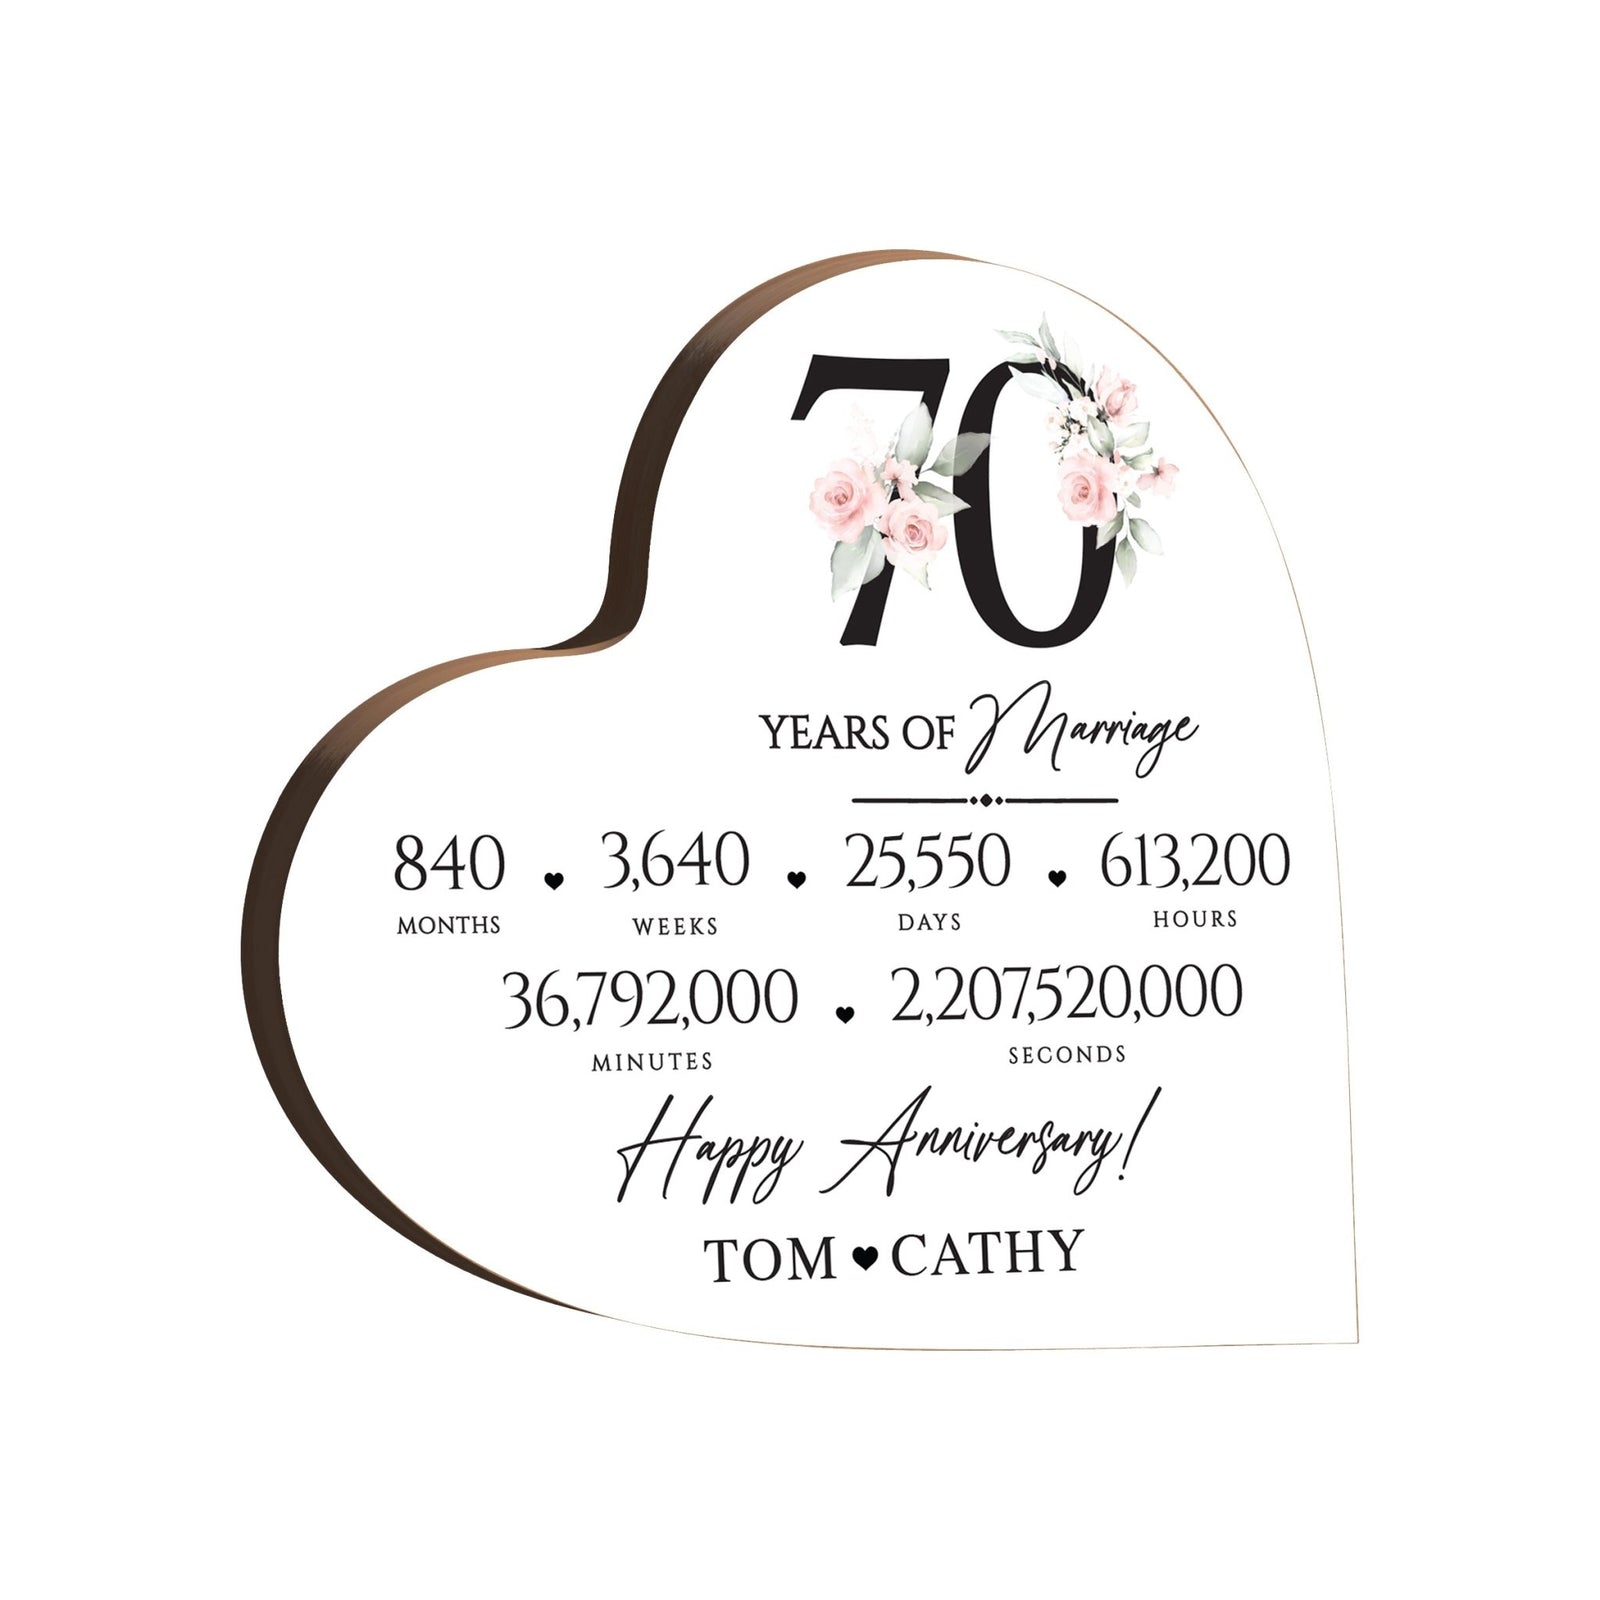 Personalized Wooden Anniversary Heart Shaped Signs - 70th Anniversary - LifeSong Milestones